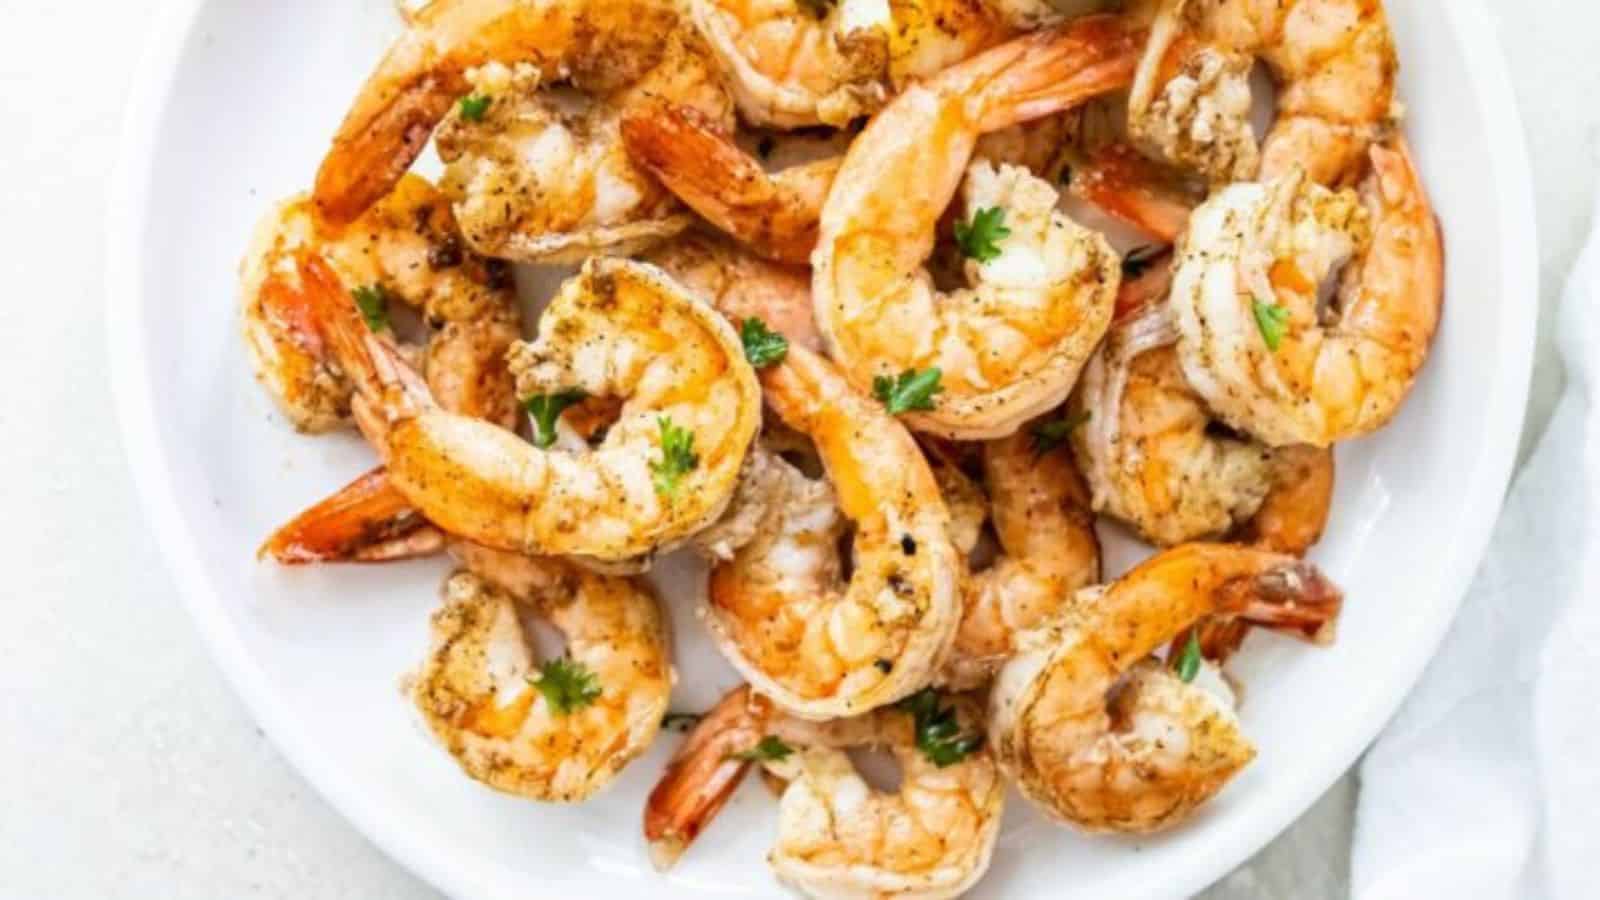 <p>Shrimp on the Blackstone Griddle is a breeze, ready in under 5 minutes. Dive into this zesty lemon garlic recipe for quick and delicious seafood bliss!<br><strong>Get the Recipe: </strong><a href="https://laraclevenger.com/lemon-garlic-shrimp-on-blackstone-griddle/?utm_source=msn&utm_medium=page&utm_campaign=msn">Lemon Garlic Shrimp on the Blackstone Griddle</a></p>